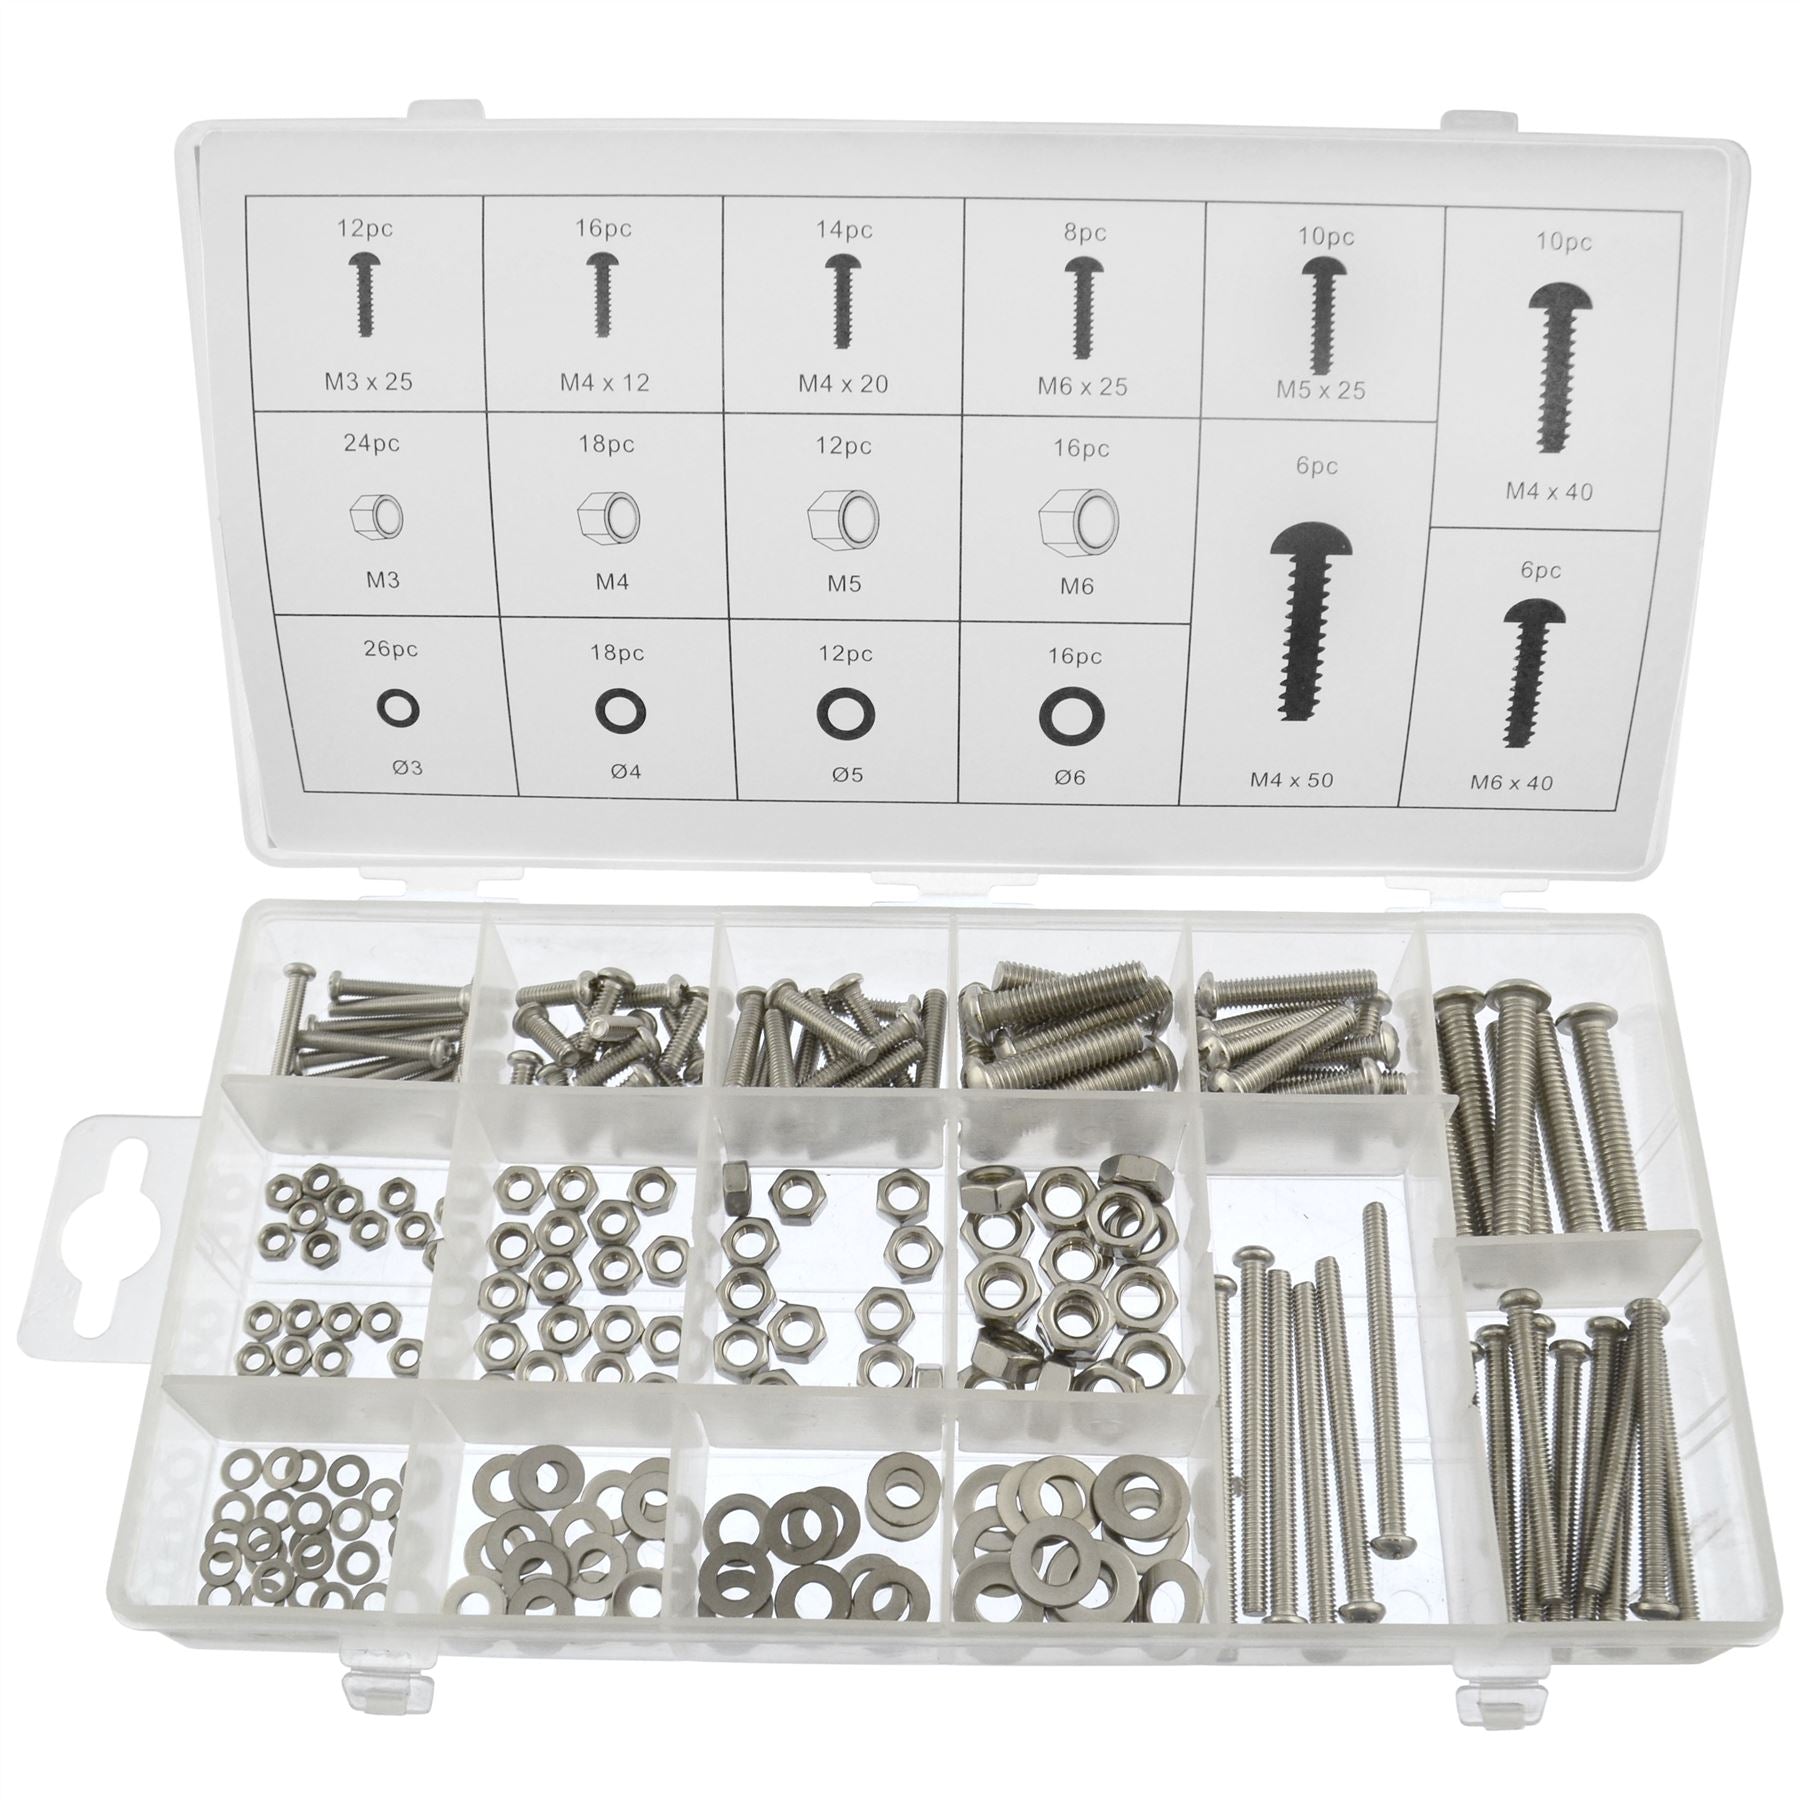 Stainless steel Nuts Bolts Washers Fasteners Fixings M3 - M6 224pc kit AST17